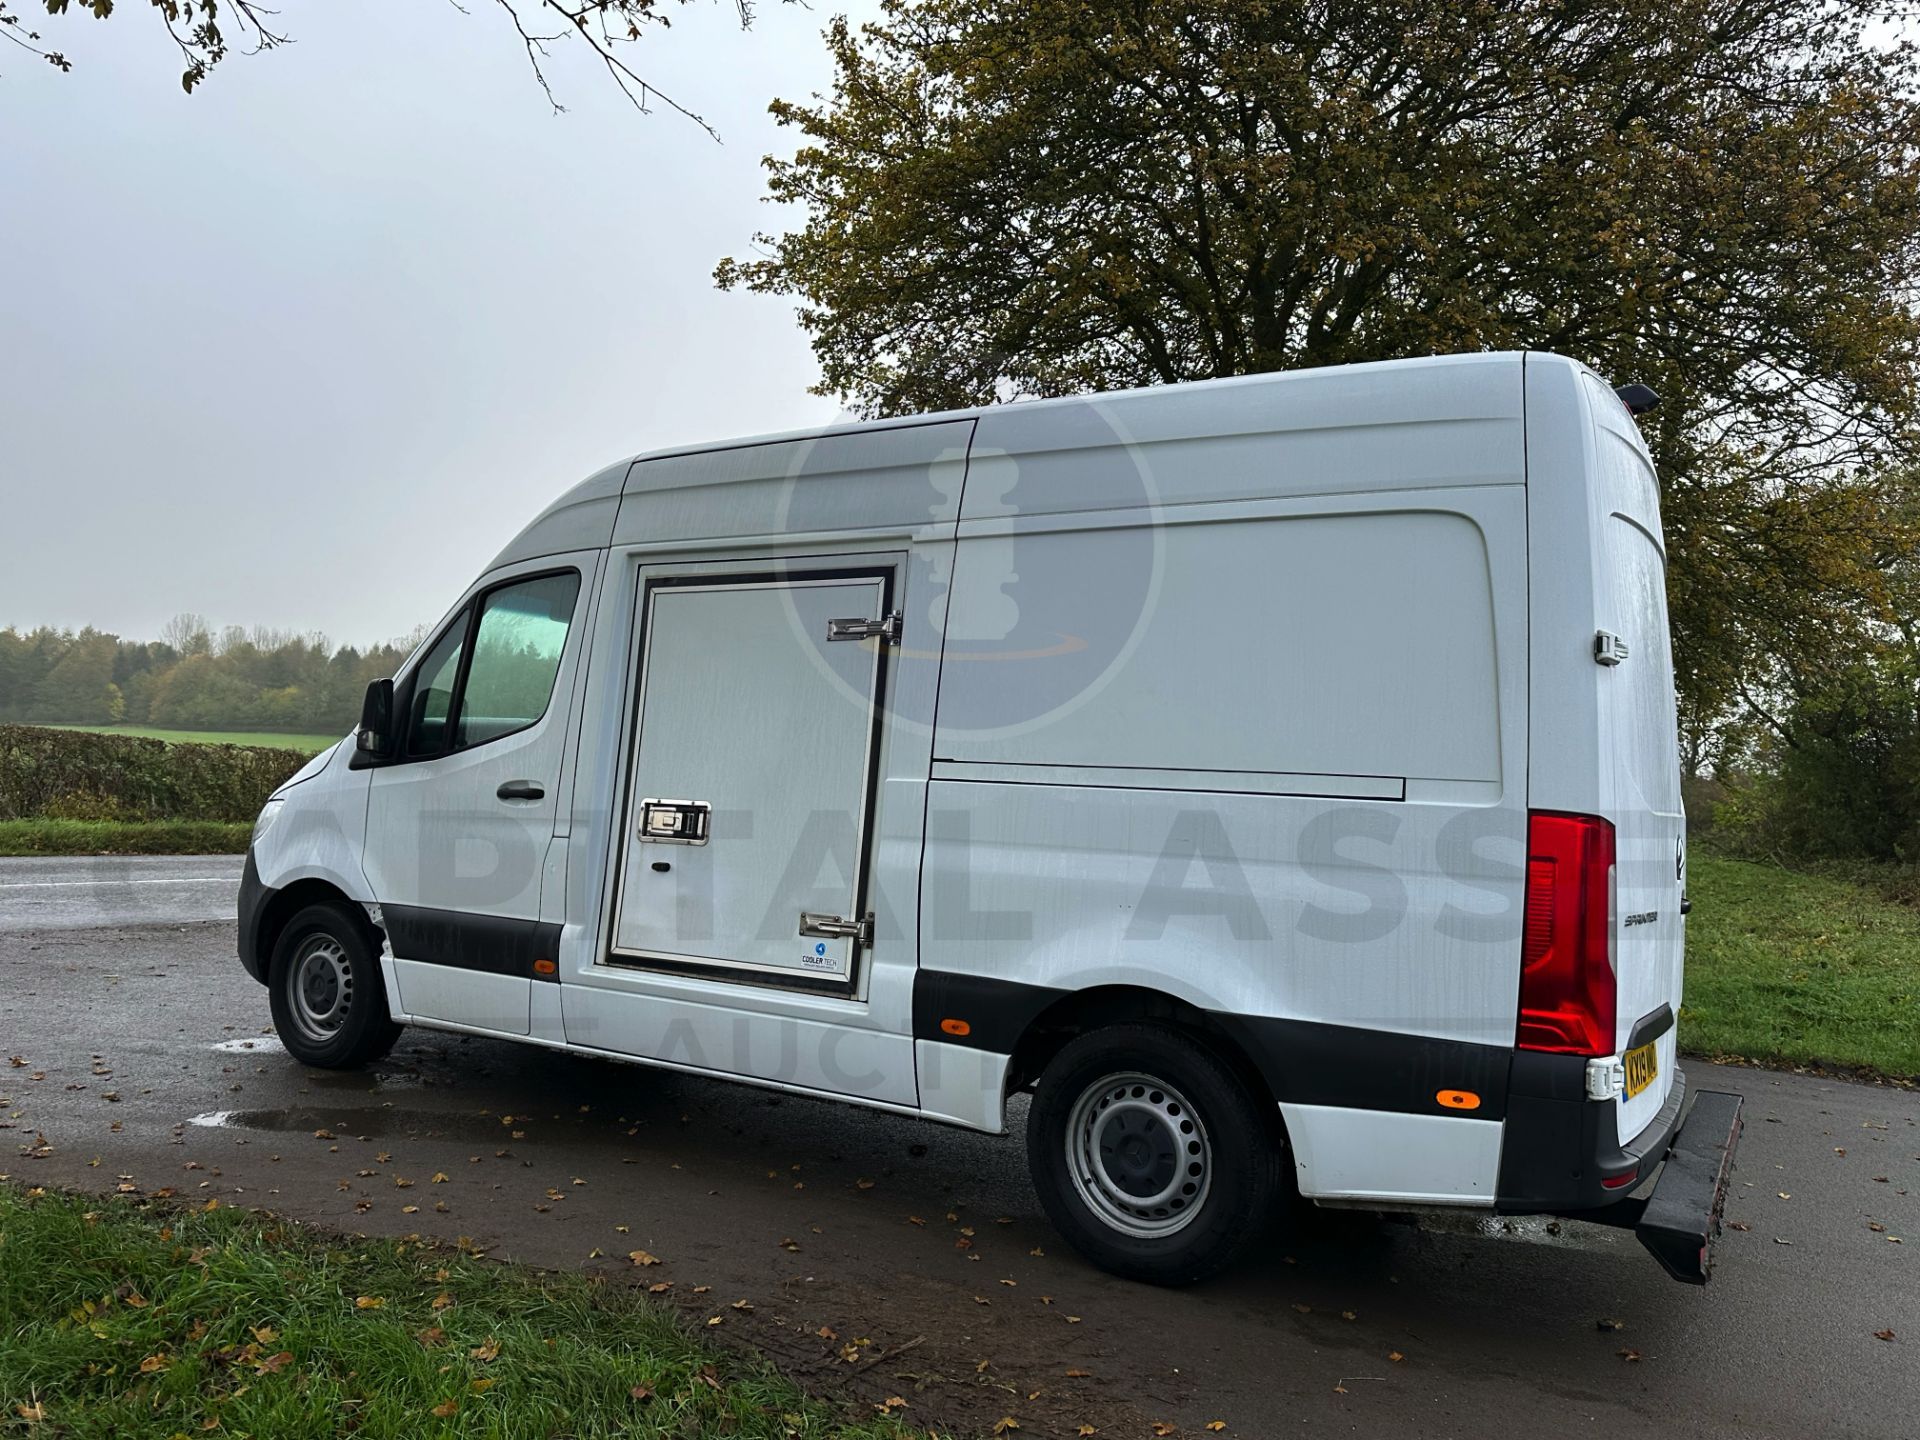 MERCEDES-BENZ SPRINTER 314 CDI *MWB - REFRIGERATED VAN* (2019 - FACELIFT MODEL) *OVERNIGHT STANDBY* - Image 11 of 45